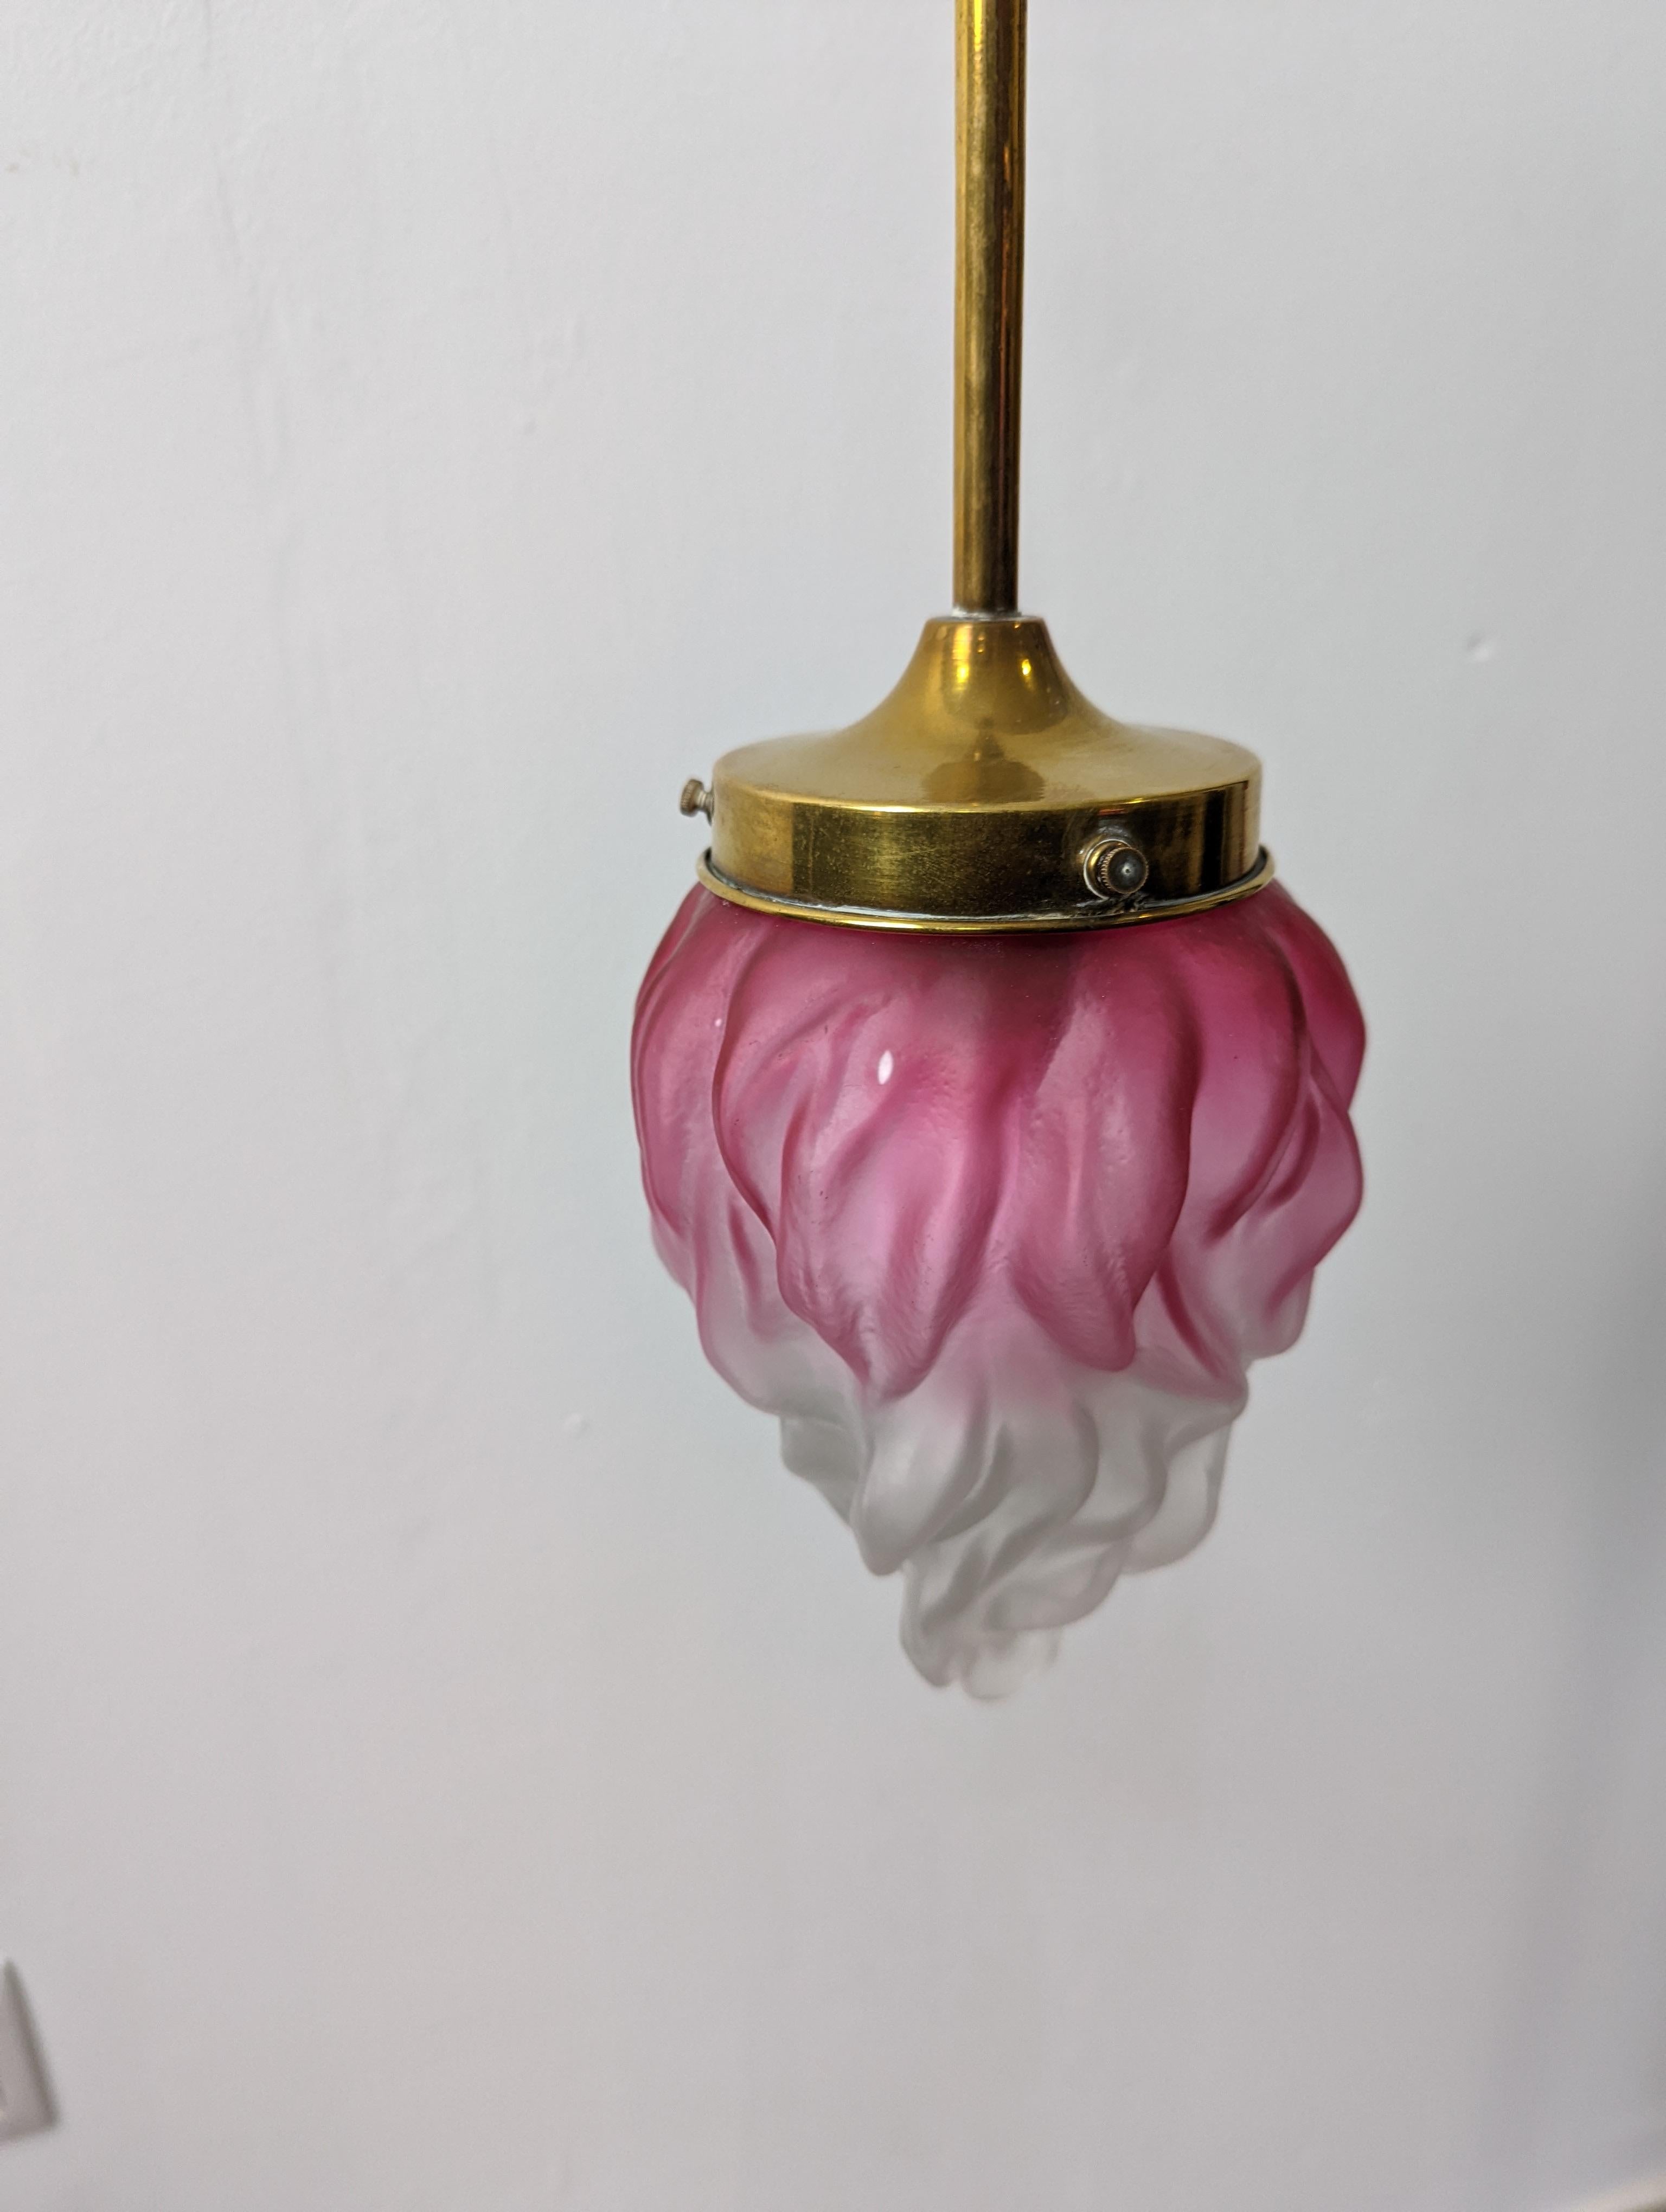 European Art Nouveau Torch-Shaped Lamp in Glazed Glass, 1920s For Sale